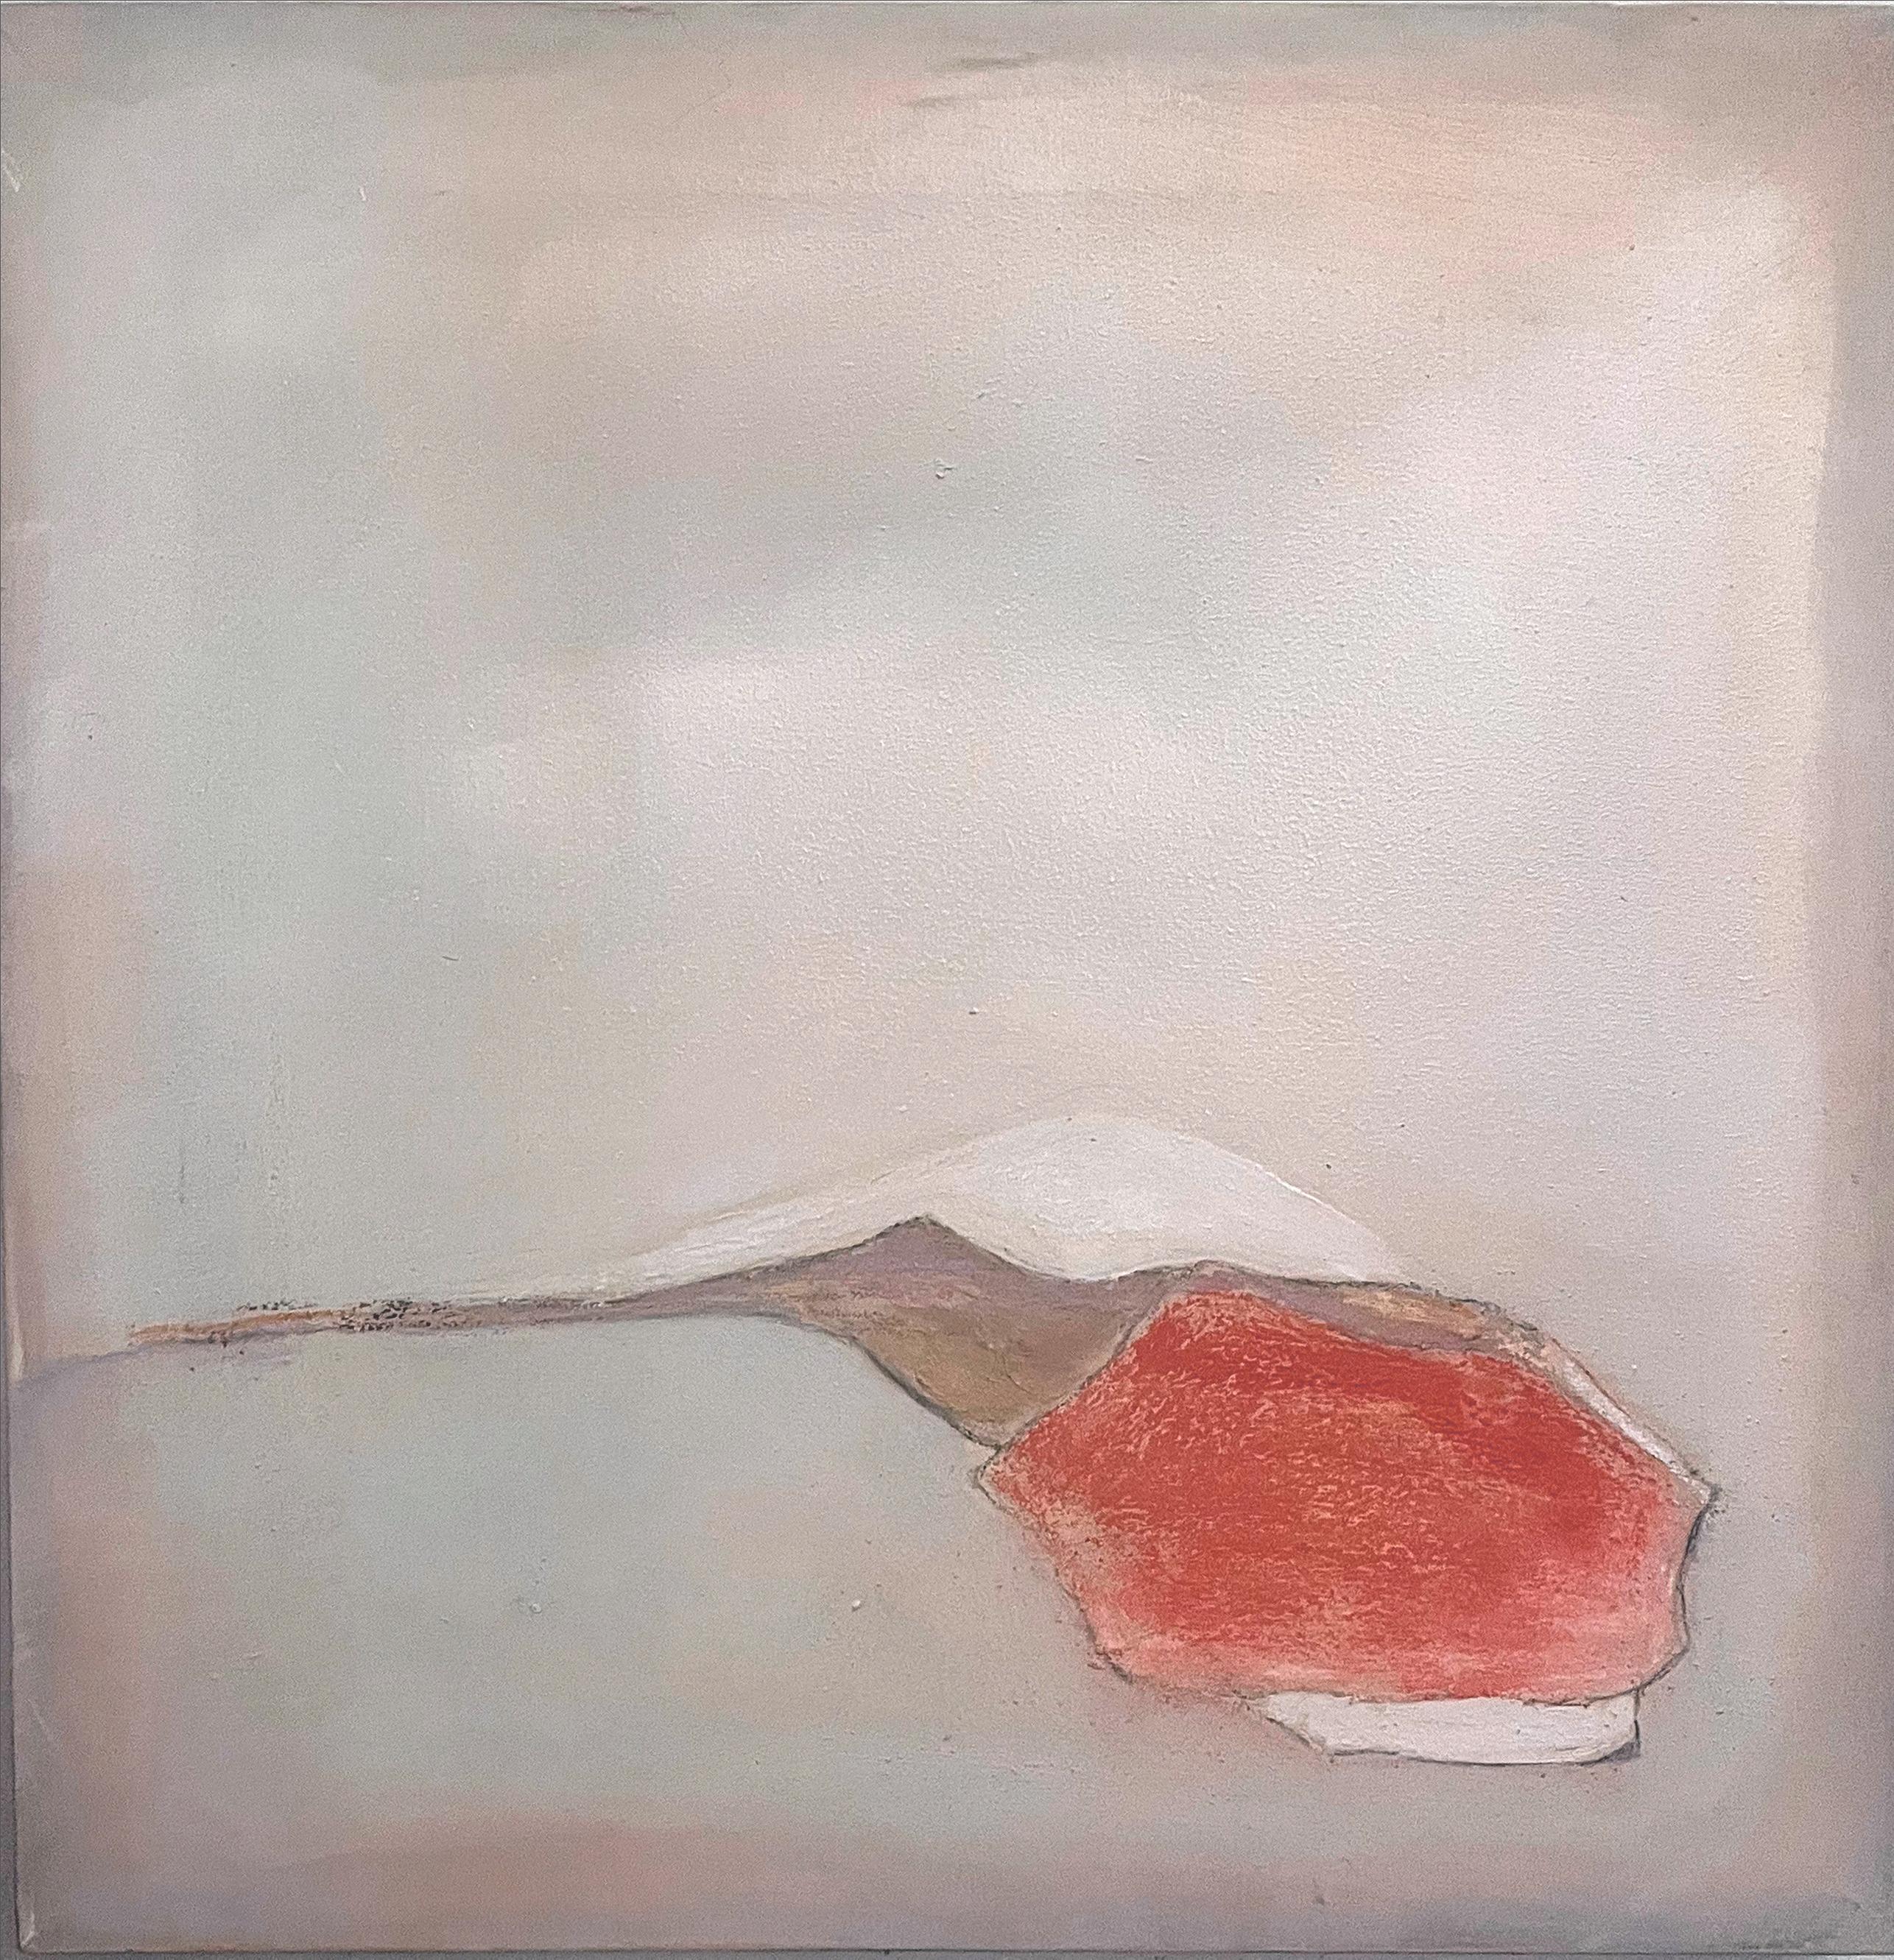 Landscape
mixed media on cotton canvas
ready to hang
50x50 cm
Original Art


Marilina Marchica was born in Agrigento, where she works and lives,
After receiving her diploma at Liceo Artistico "Michelangelo" in Agrigento, she moved to Spain for the